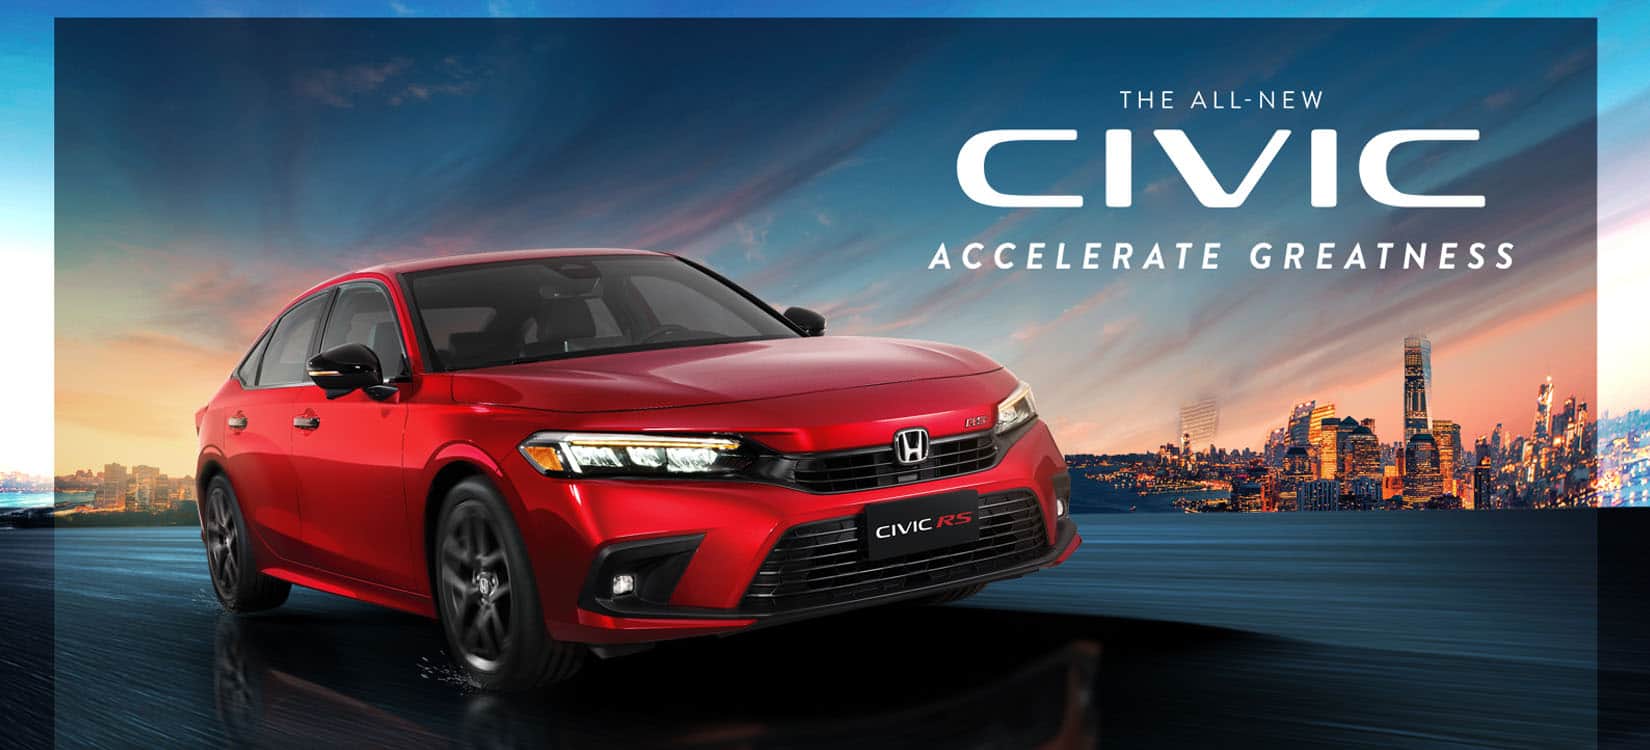 11th generation All-New Honda Civic enters the Philippine market with an all-turbo variant range with Honda SENSING